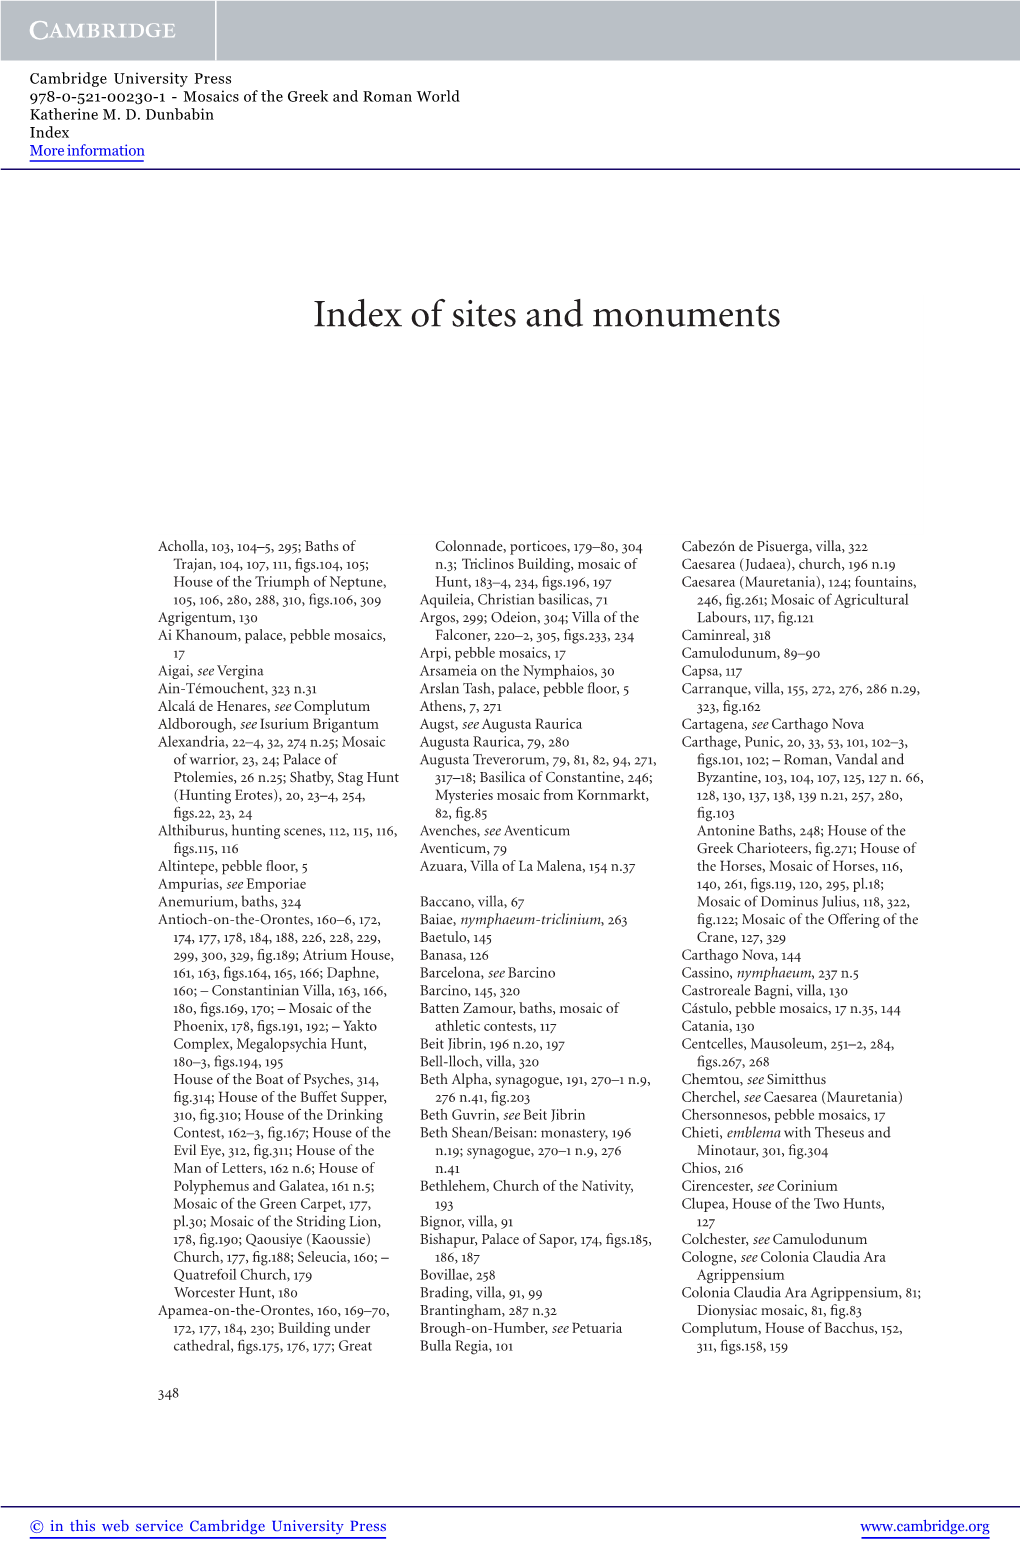 Index of Sites and Monuments